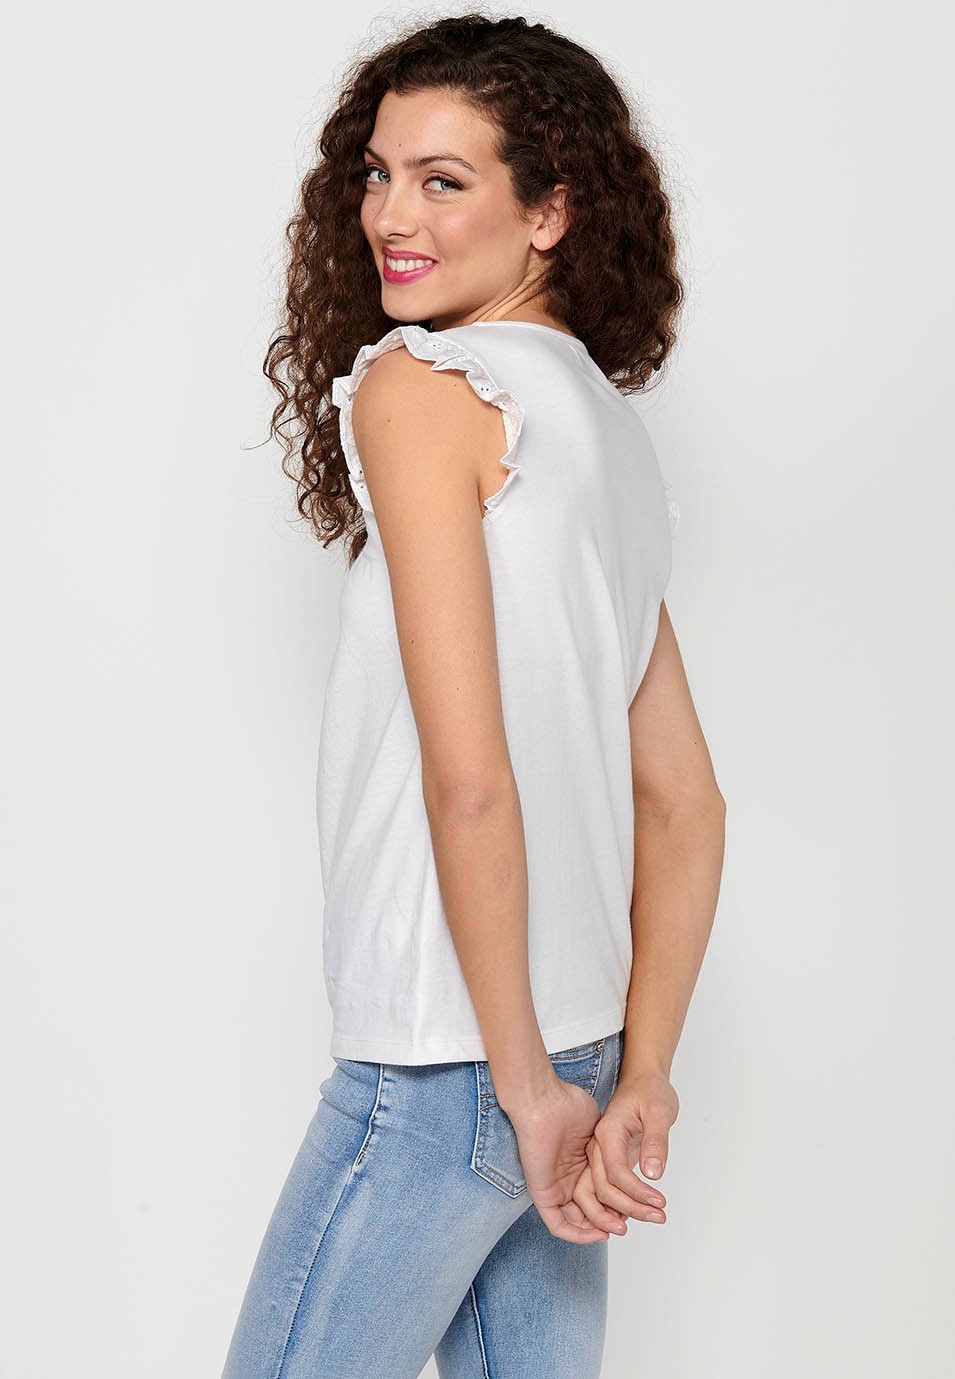 Women's White Round Neck Short Sleeve T-shirt with Ruffle on the Shoulders 5